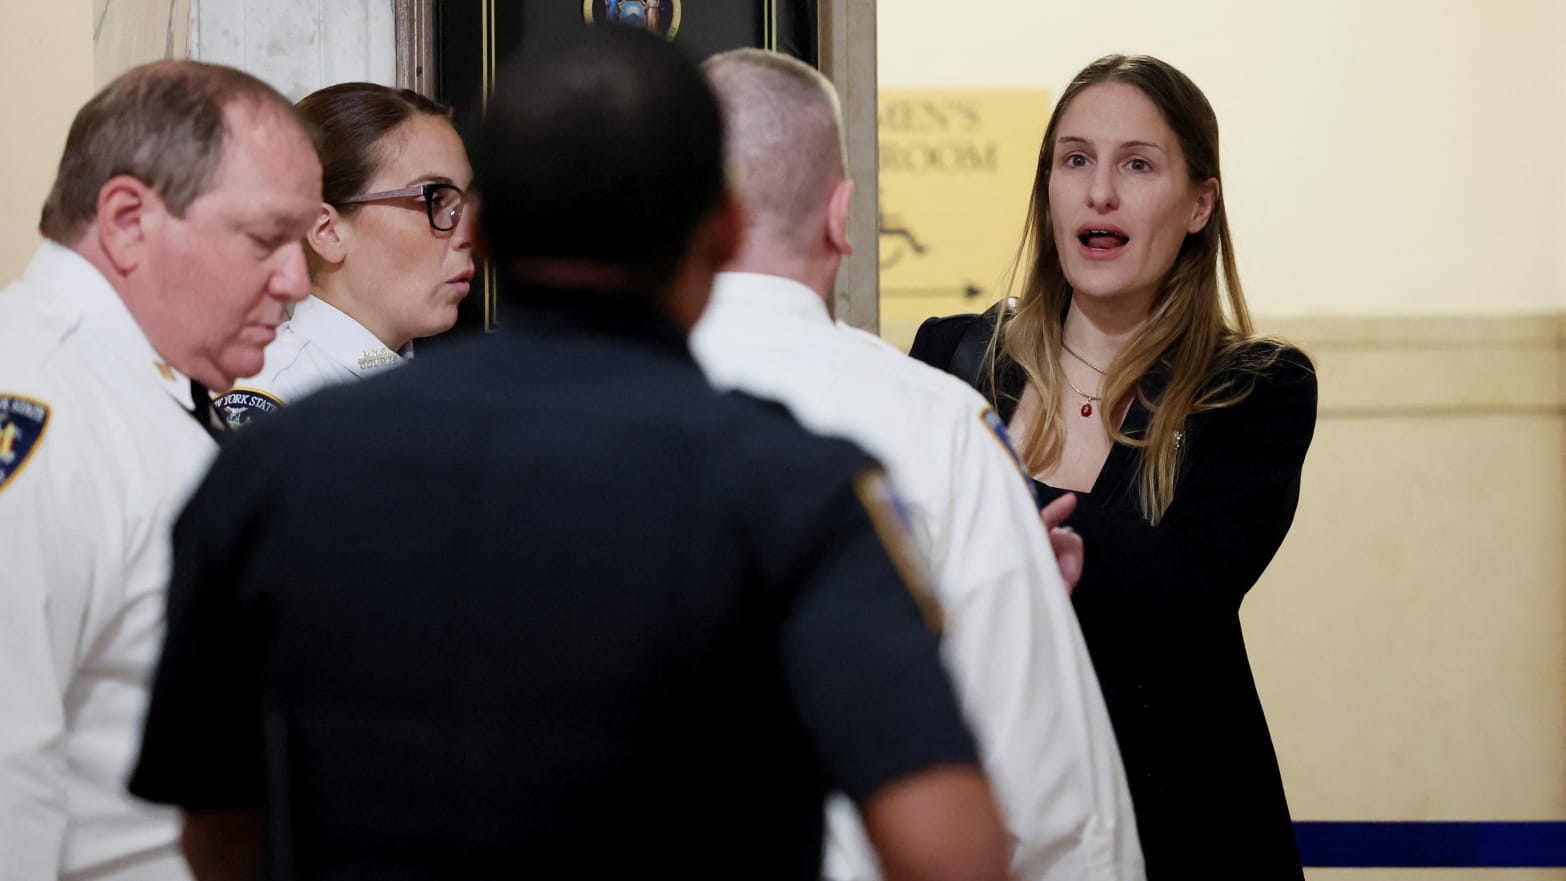 A woman talks with court officers as she is detained outside Donald Trump’s fraud trial in New York.